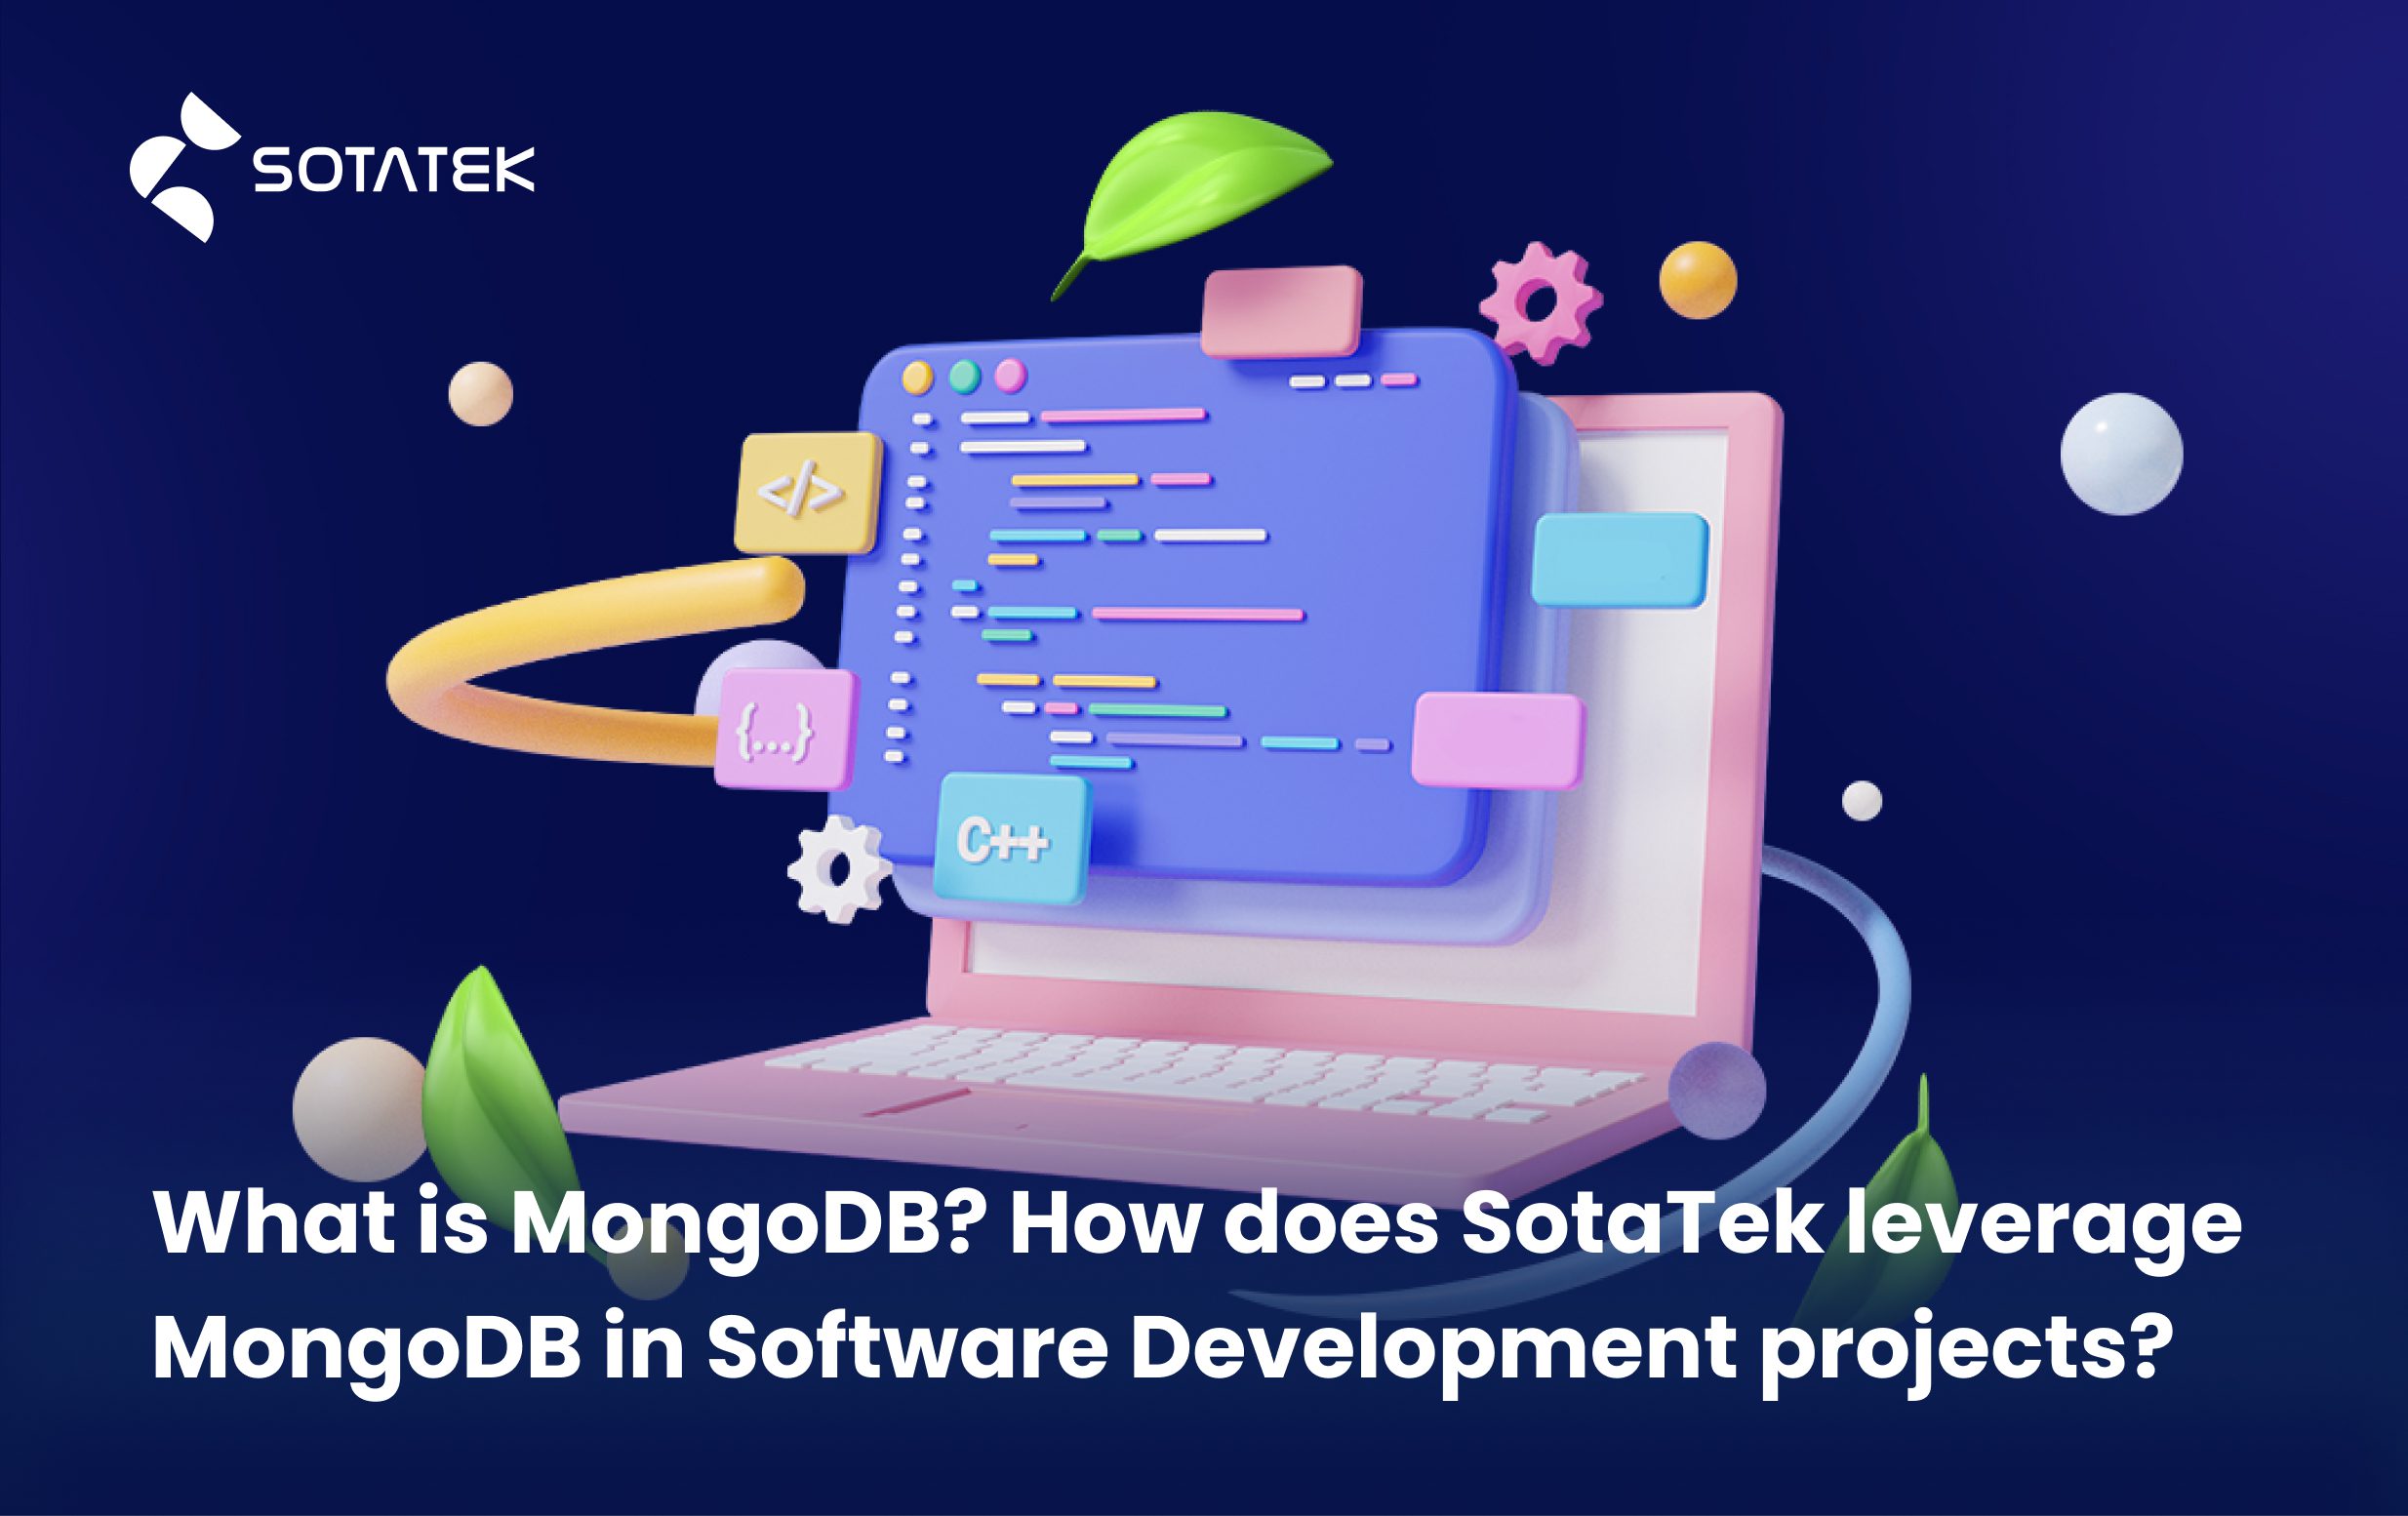 What is MongoDB? How does SotaTek leverage MongoDB in Software Development projects?